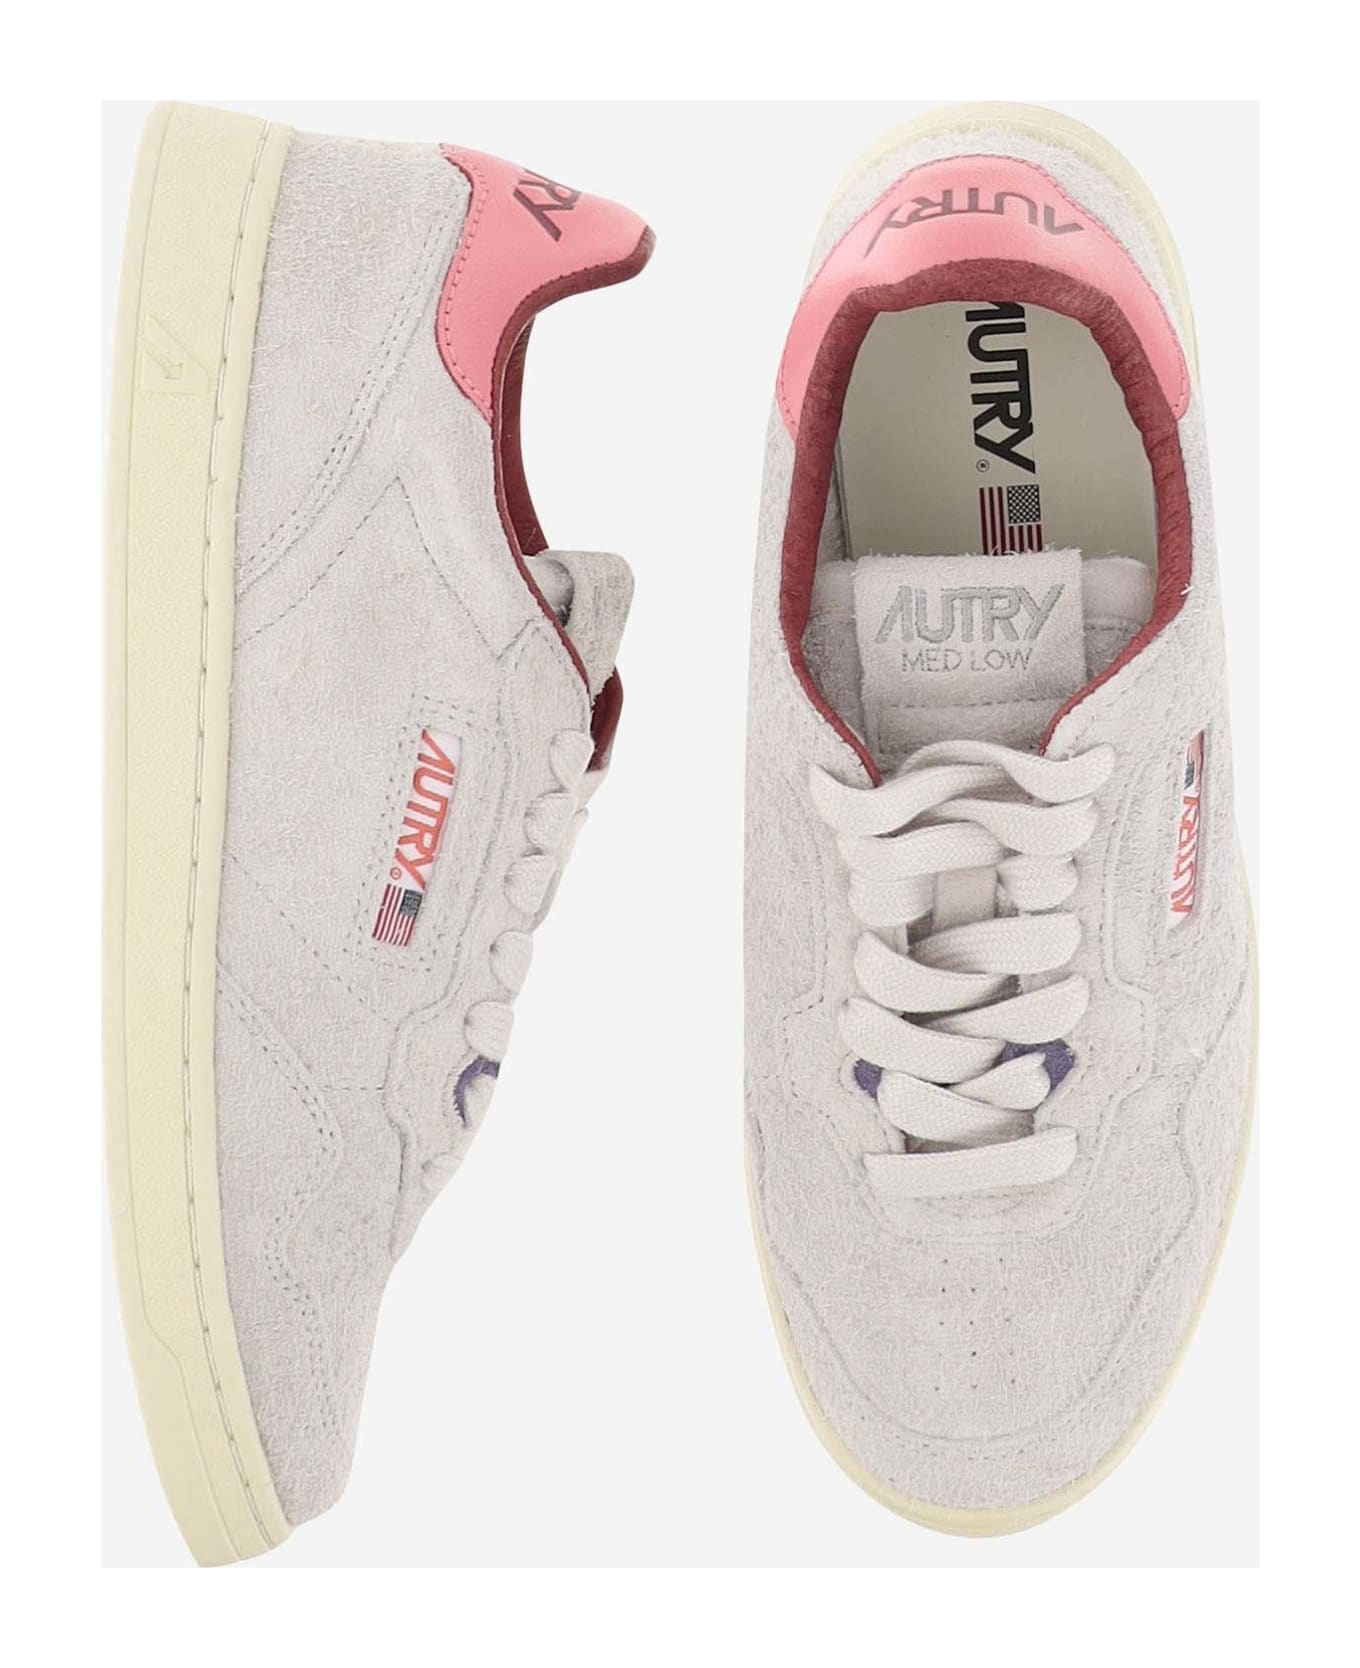 Autry Medalist Low Sneakers In Suede Hair Sand Effect - White スニーカー